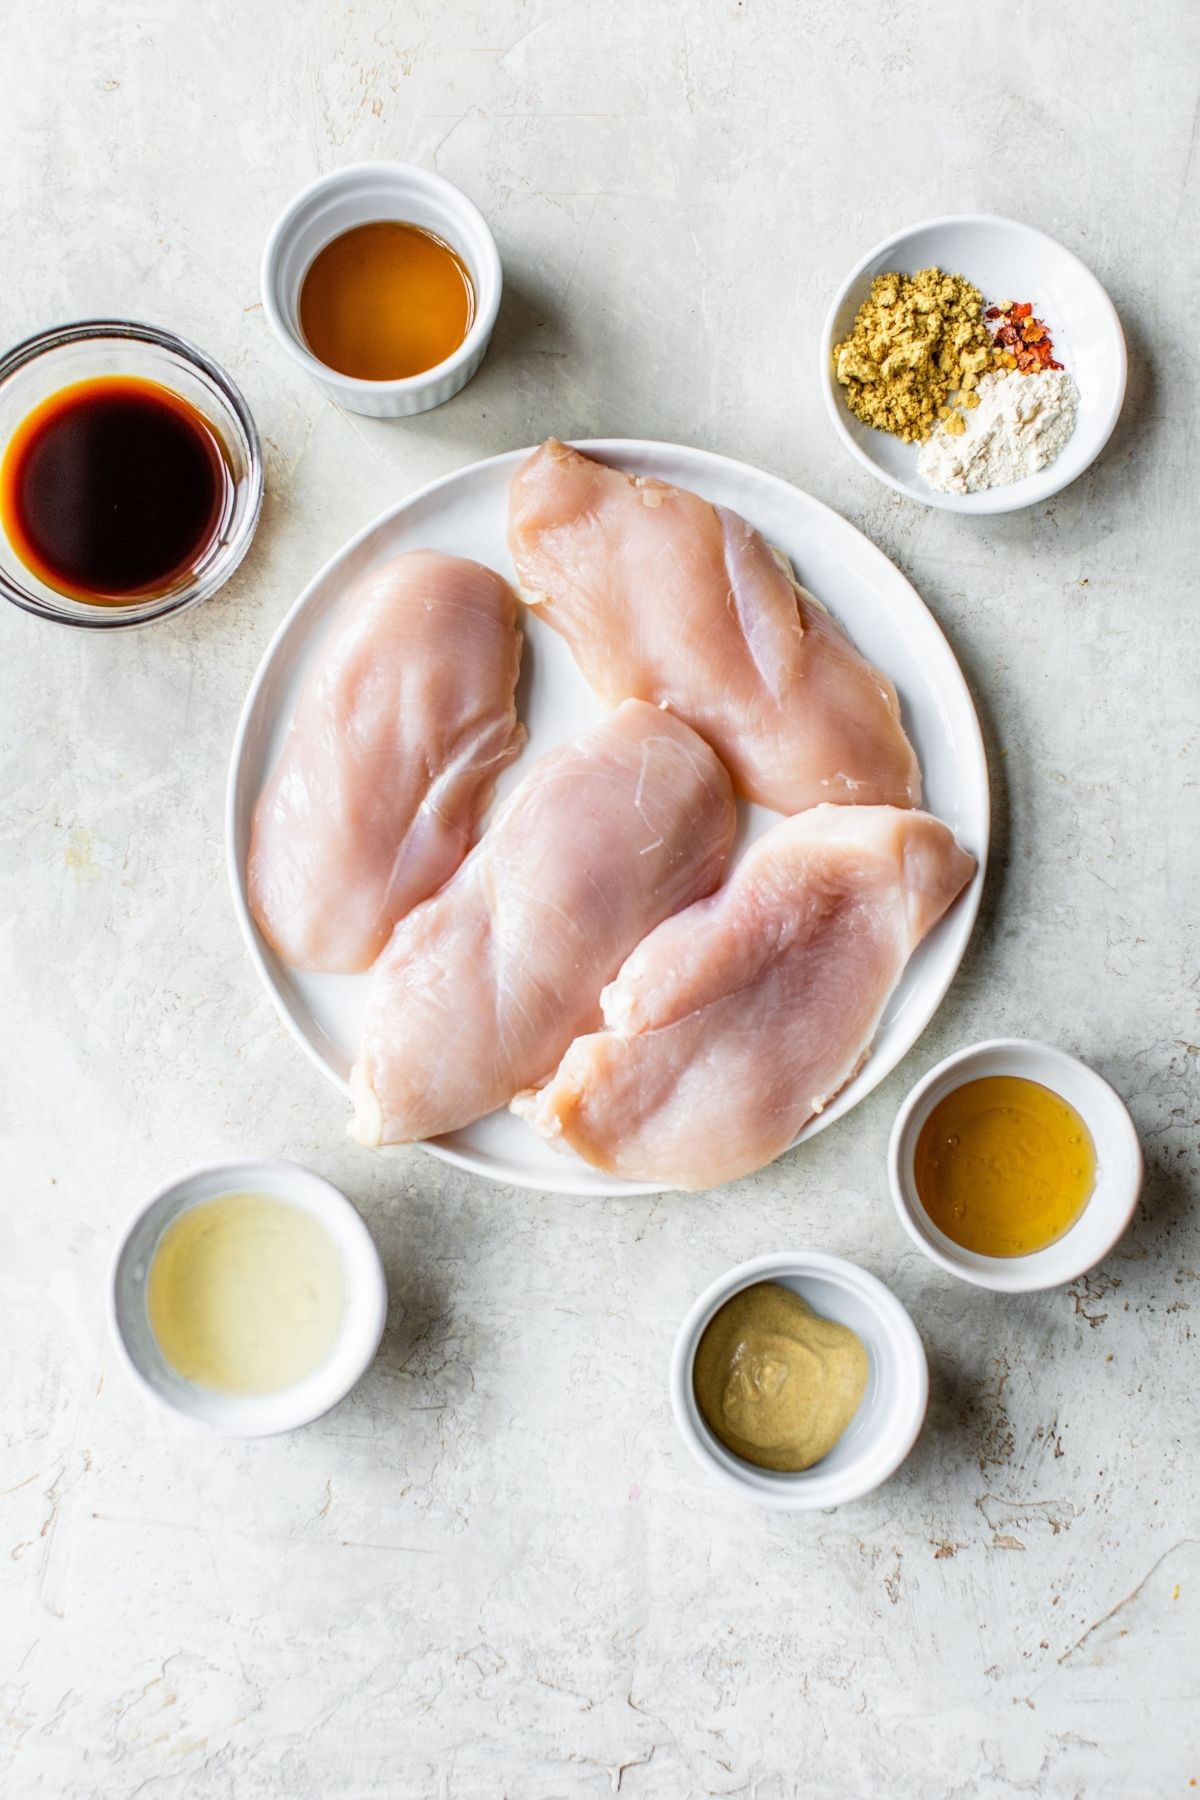 Raw chicken breast on a plate with ingredients for marinade in small bowls.